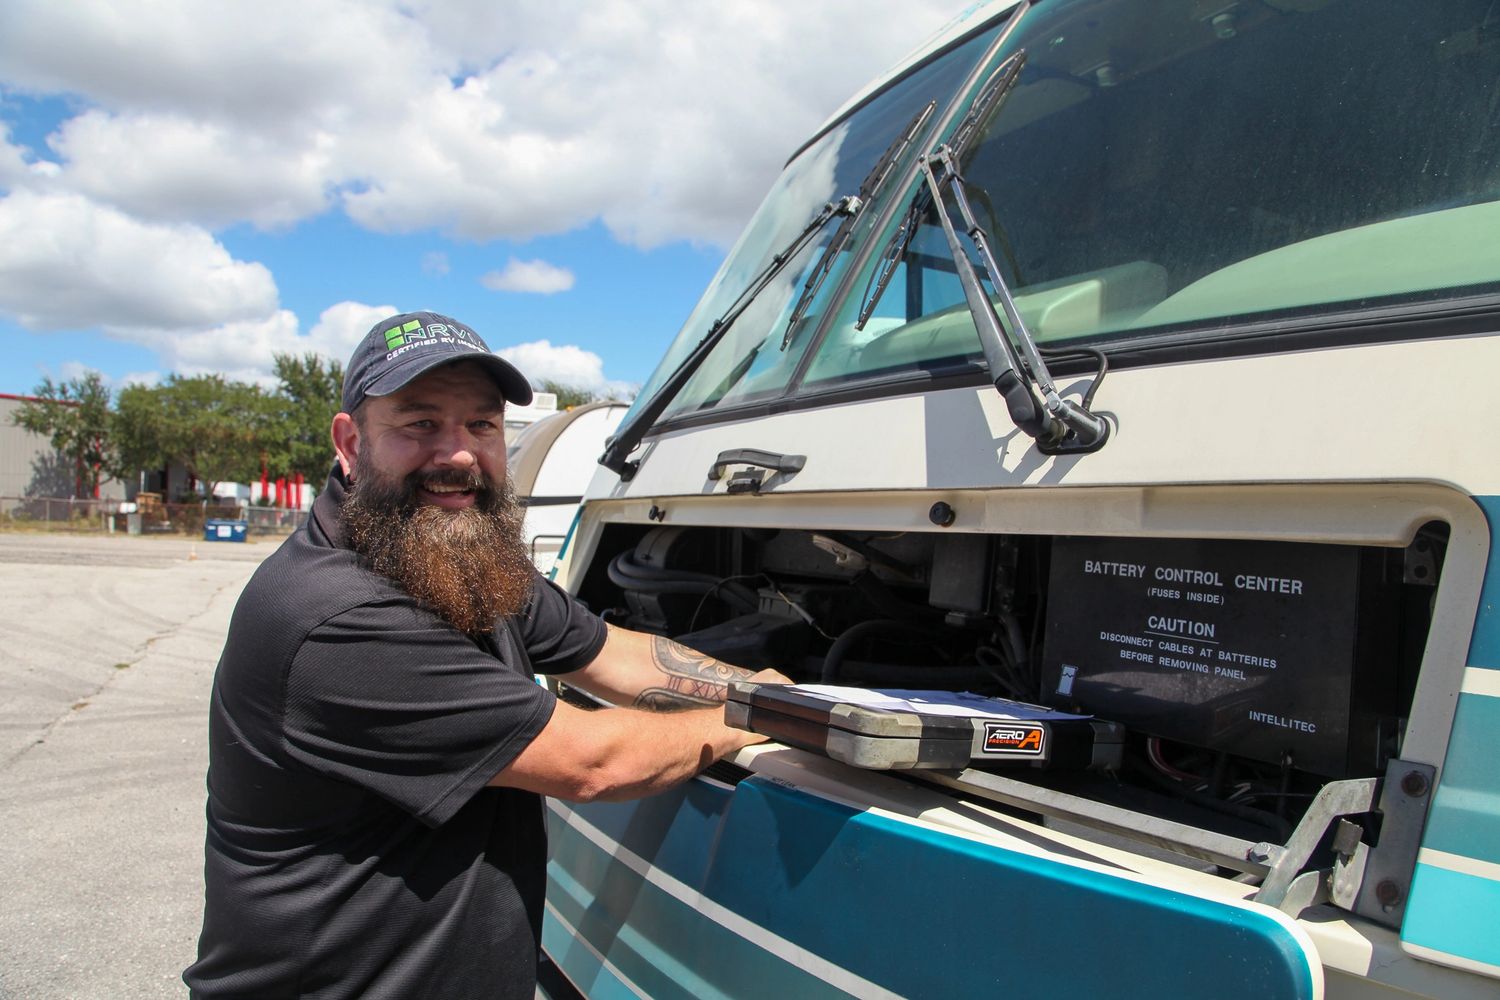 Man smiling in front of an RV and repairing the vehicle.